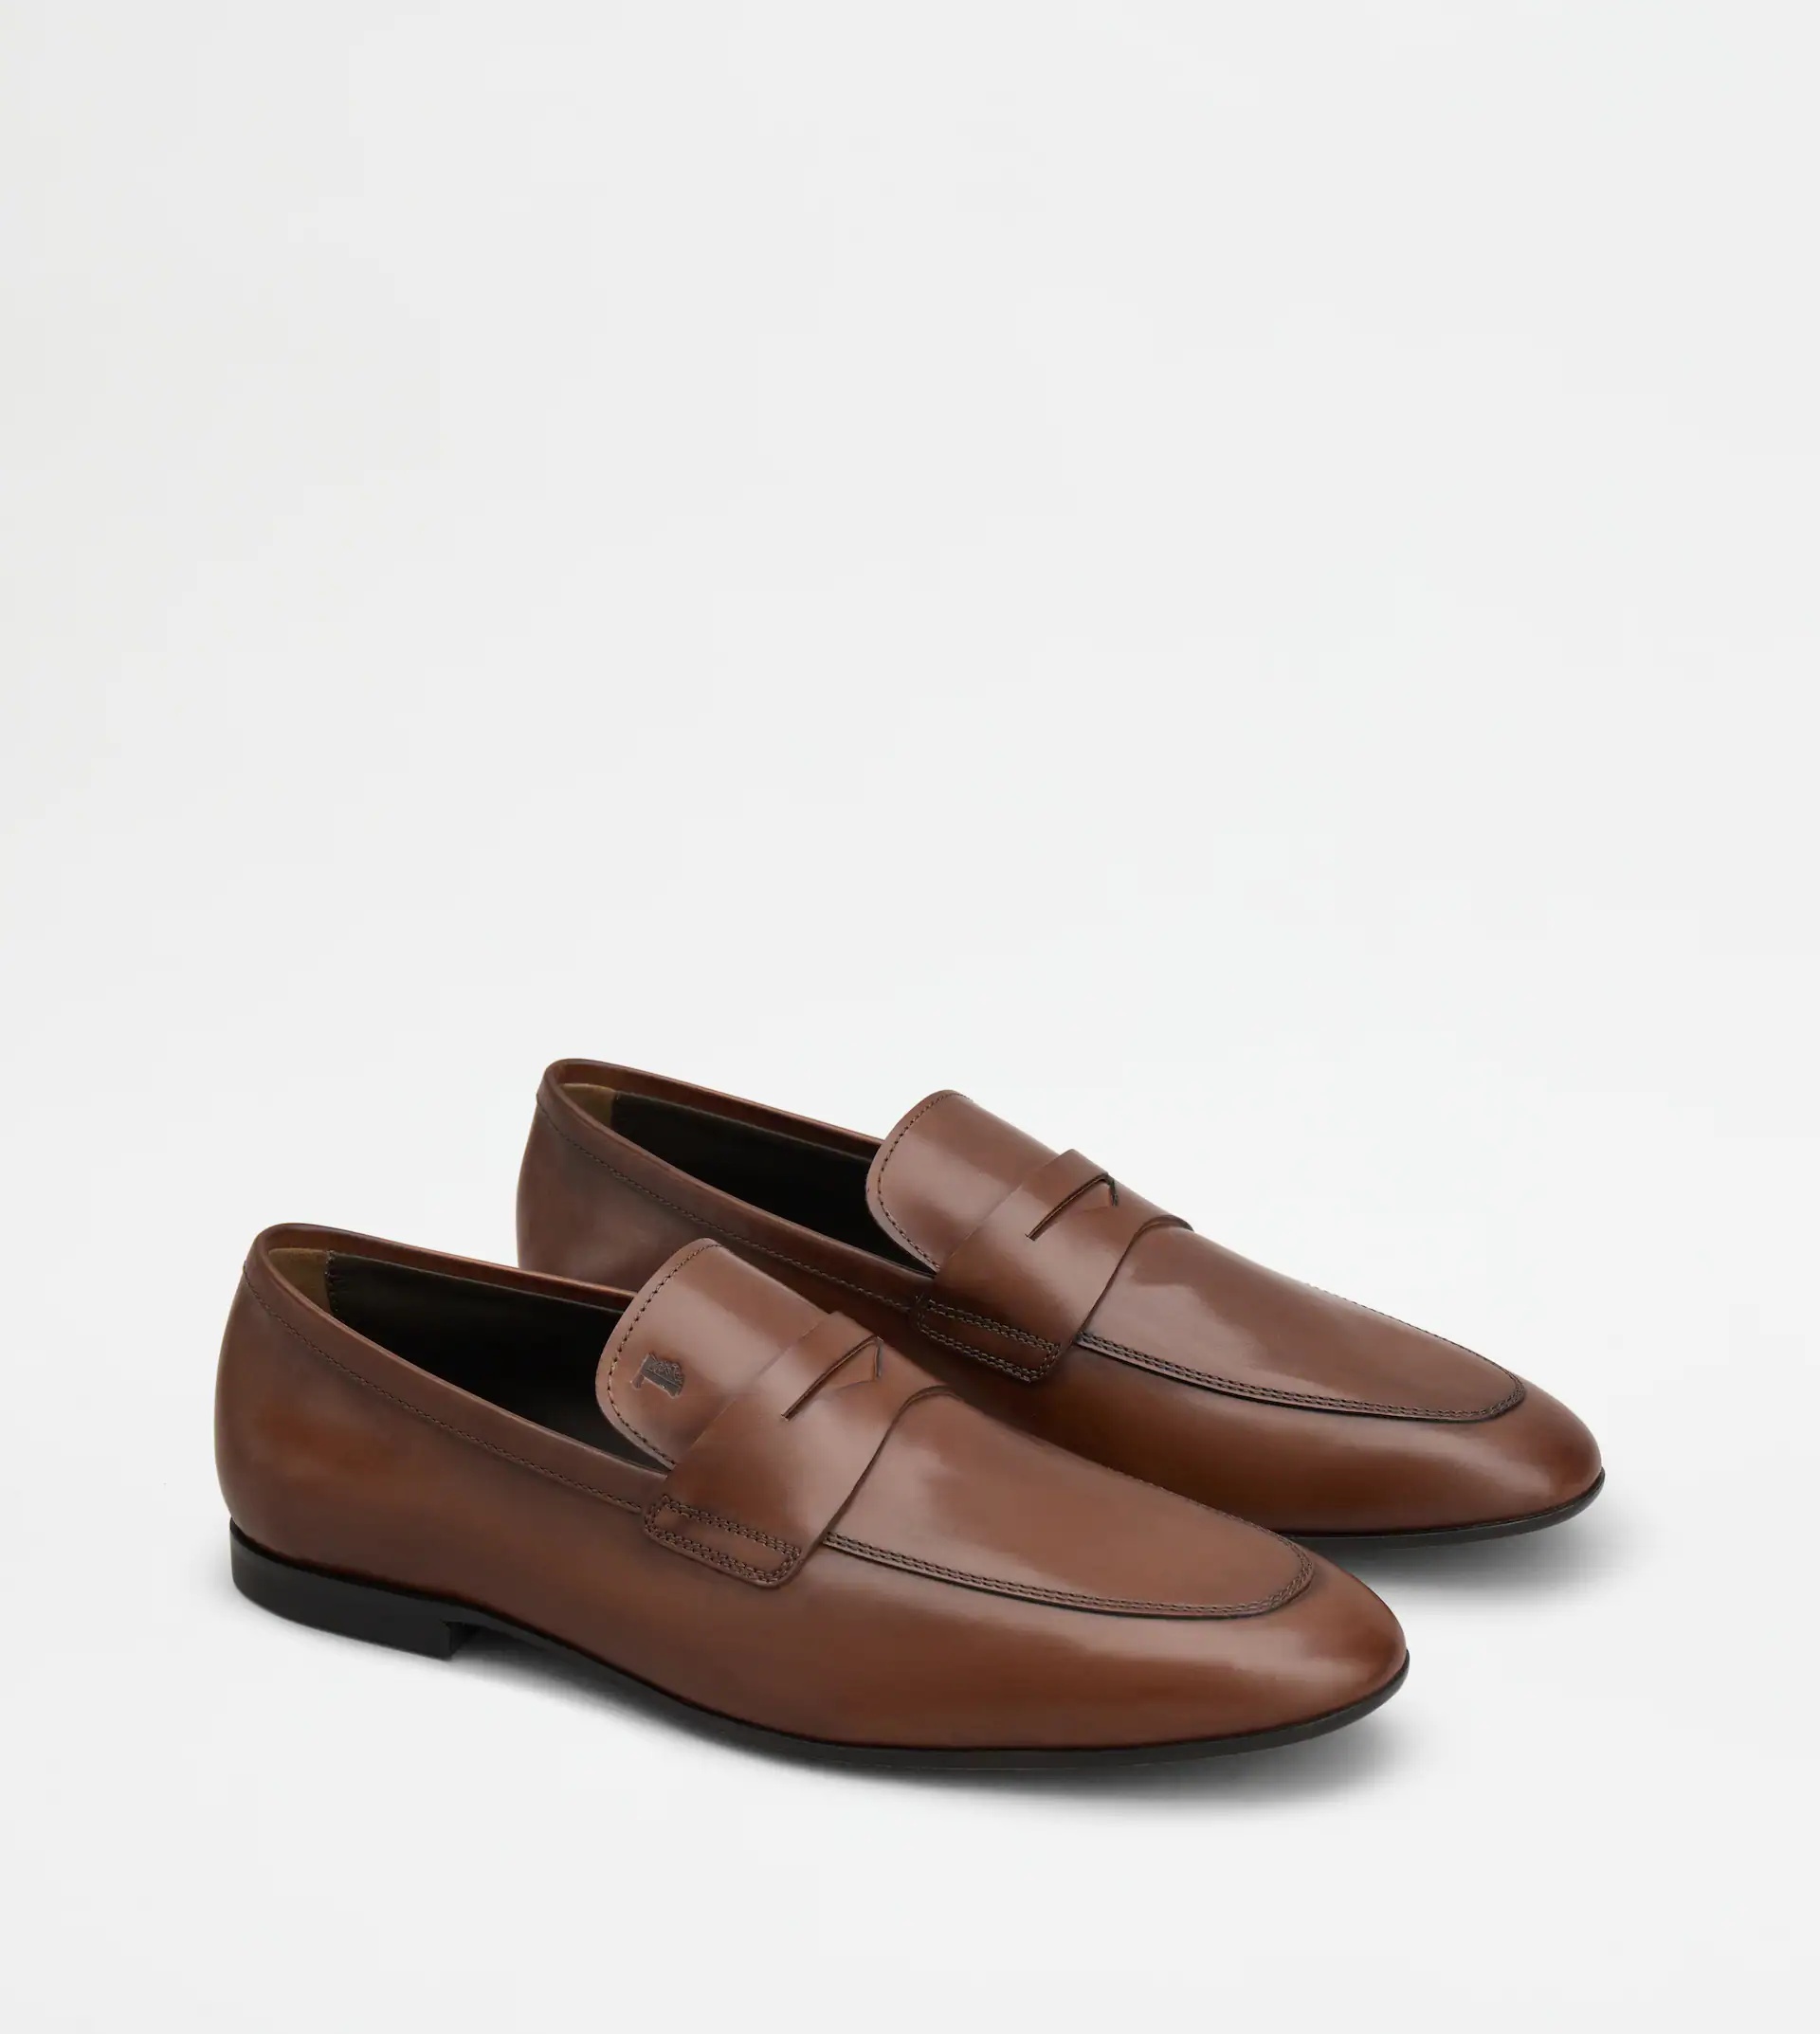 TOD'S LOAFERS IN LEATHER - BROWN - 3